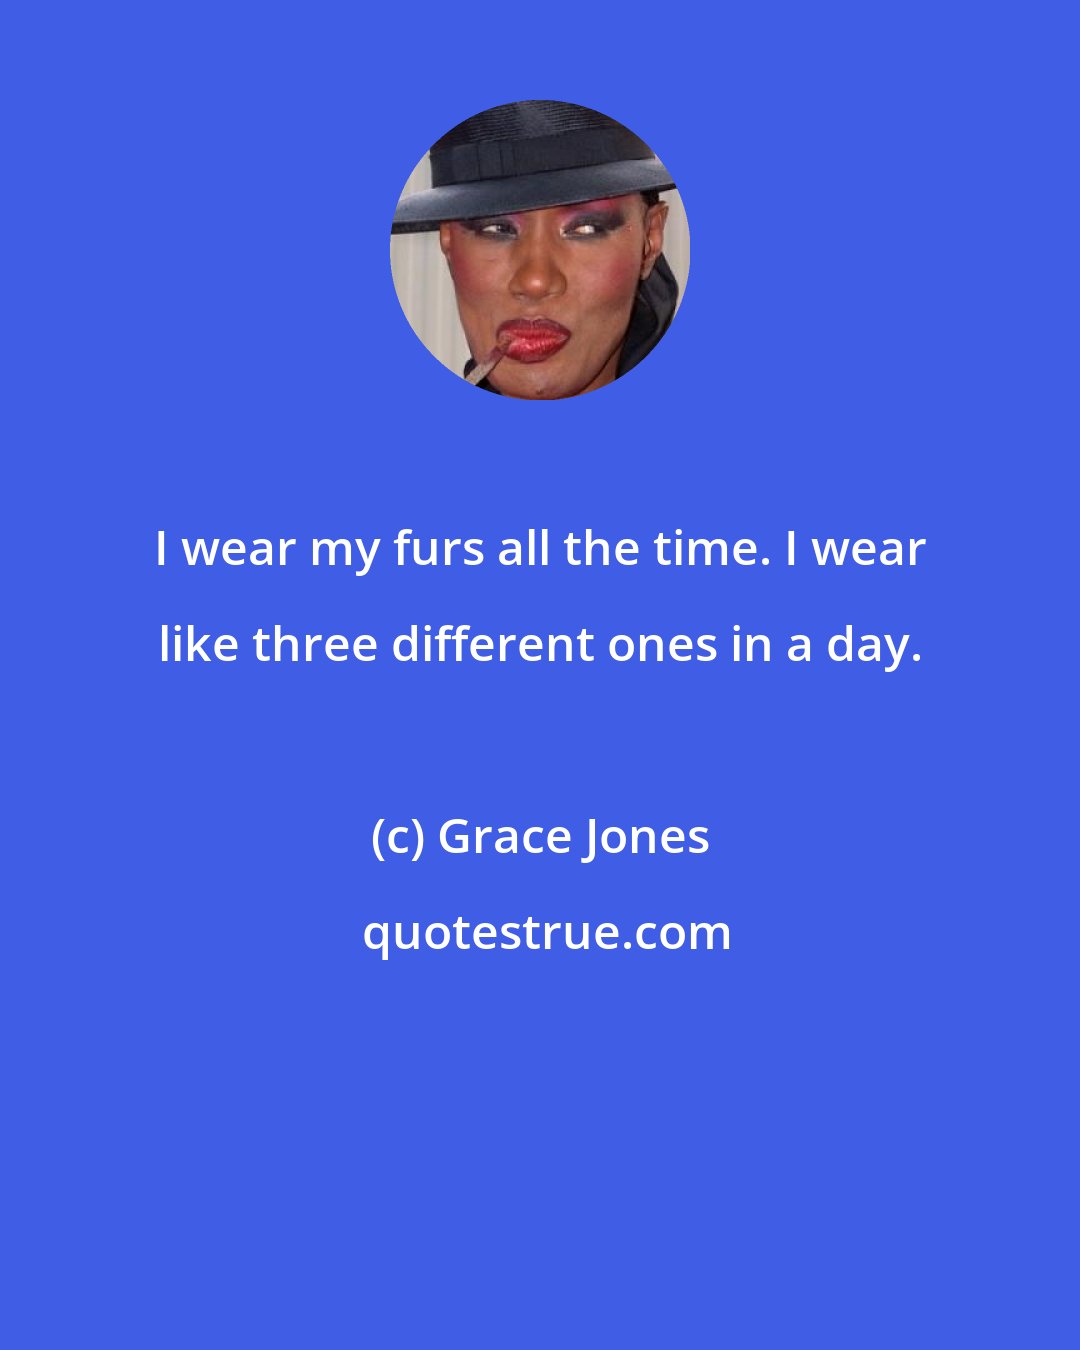 Grace Jones: I wear my furs all the time. I wear like three different ones in a day.